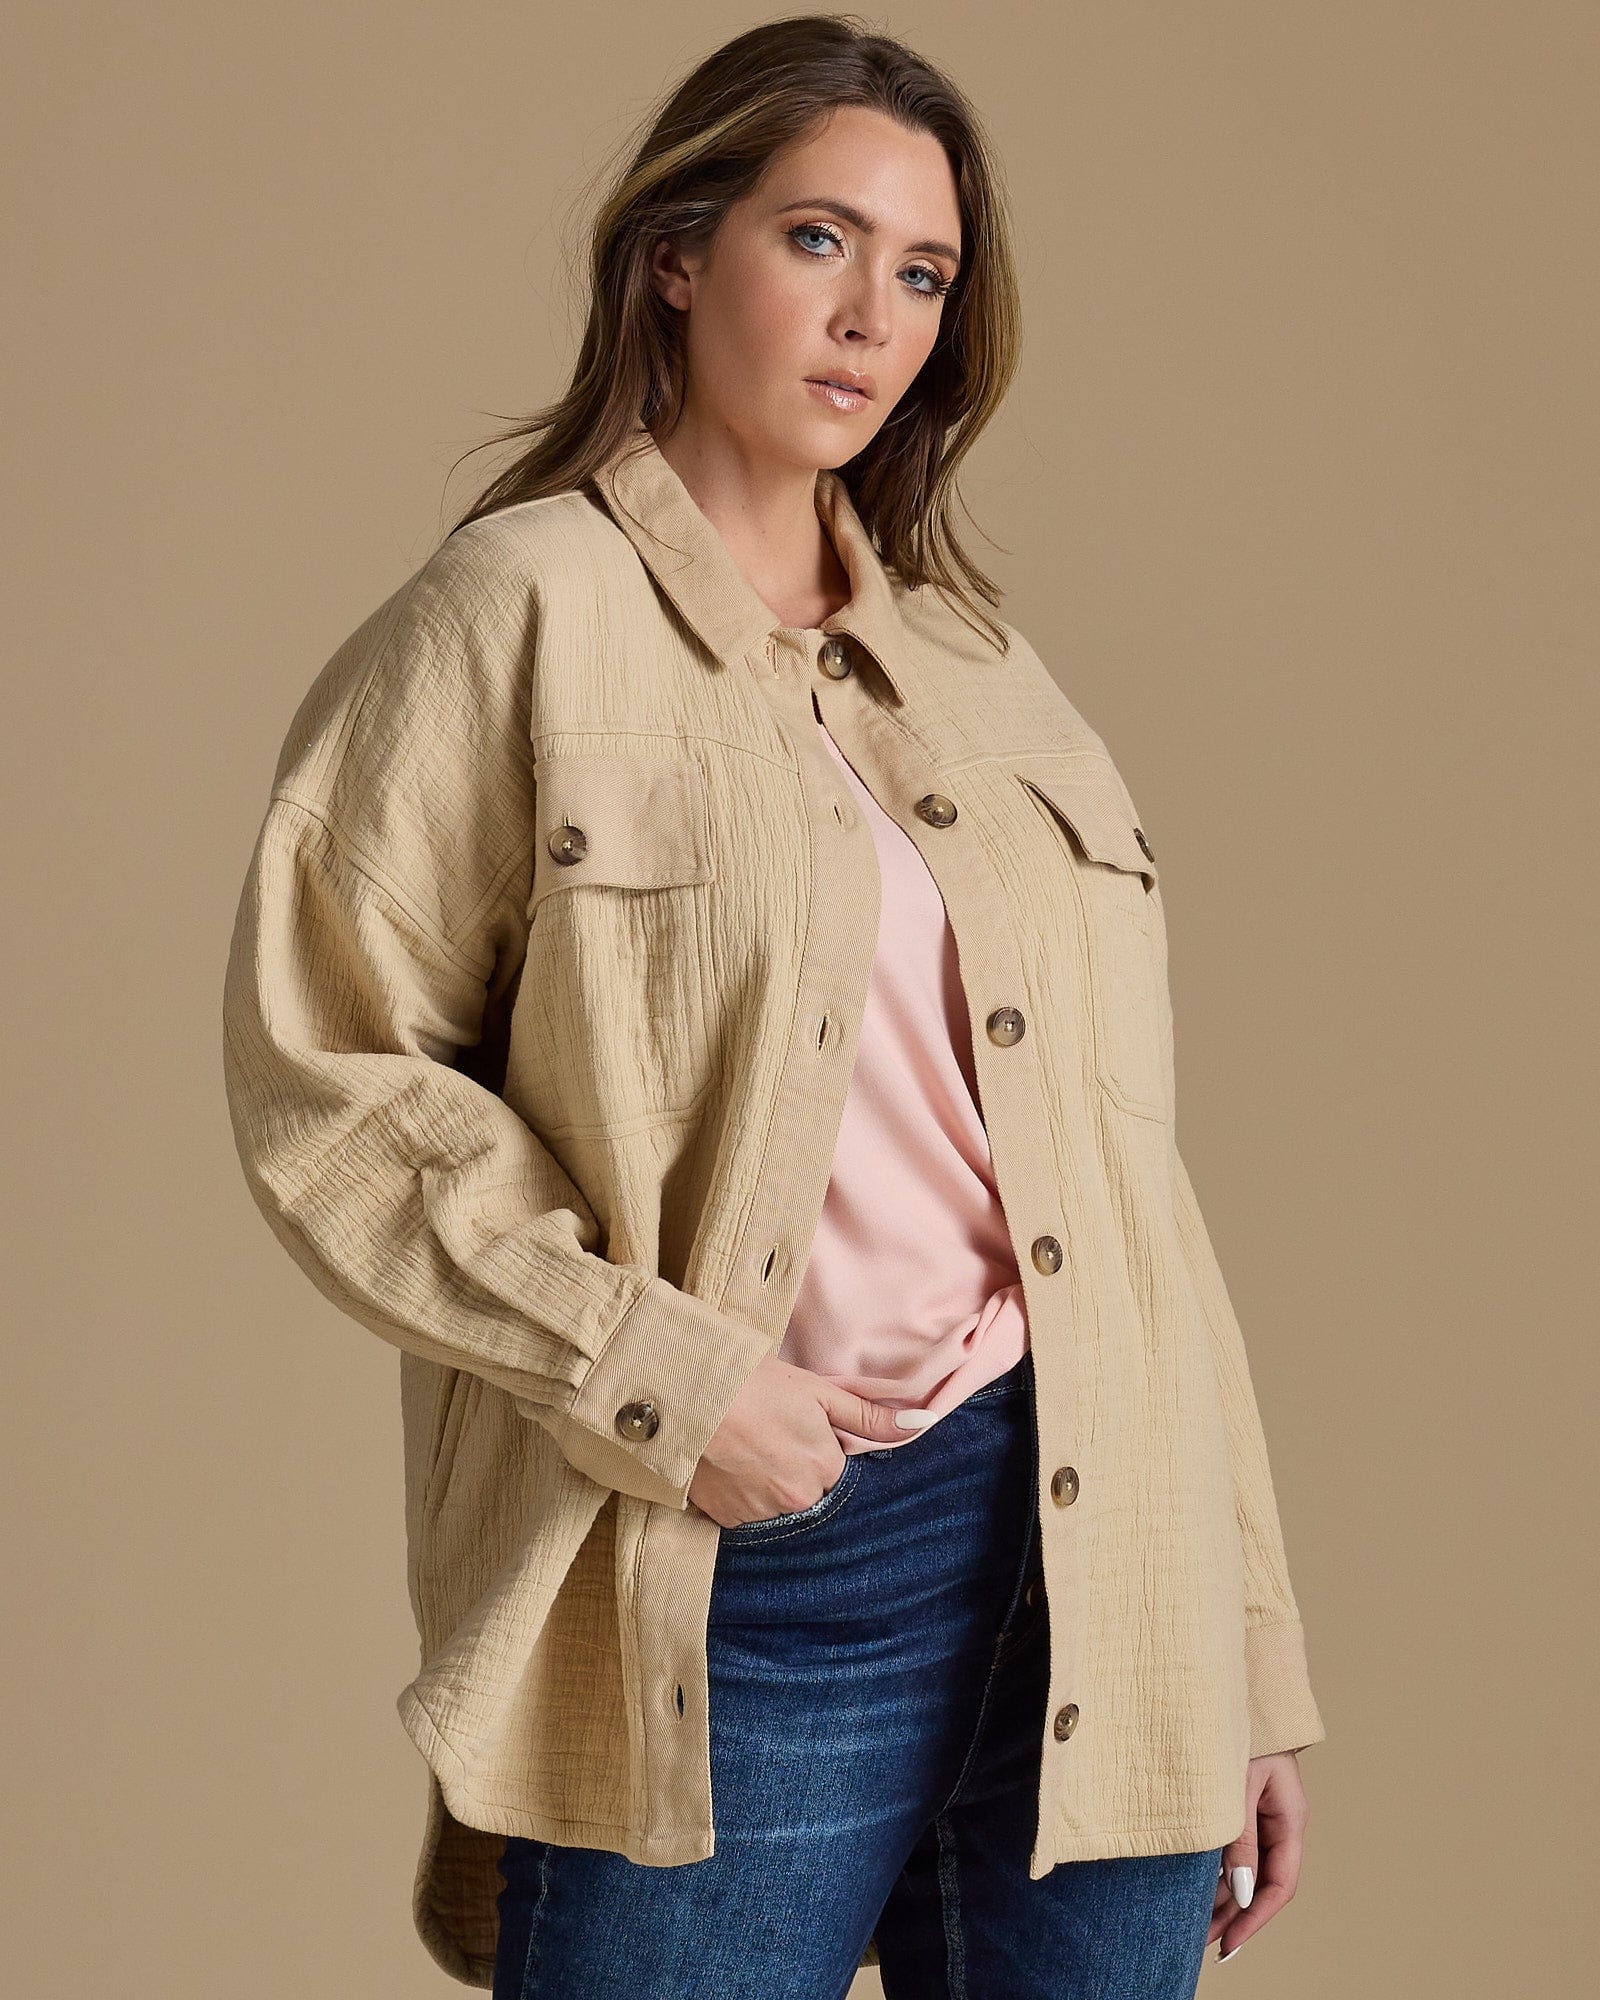 Woman in tan long sleeved textured jacket